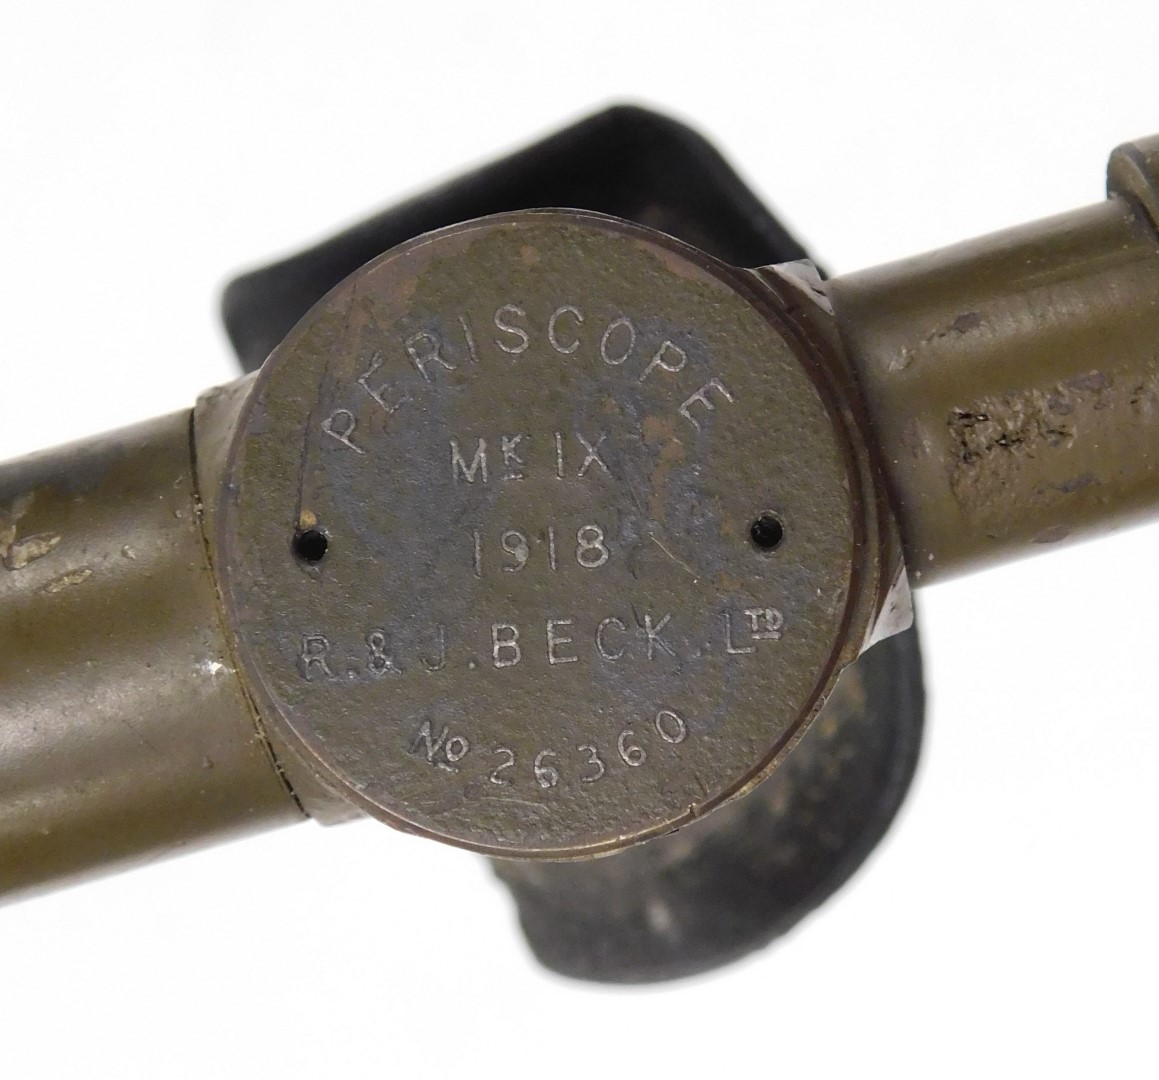 A WWI Mk IX trench periscope, 1918, by R & J Beck Ltd, number 26360, 58.5cm high. - Image 2 of 3